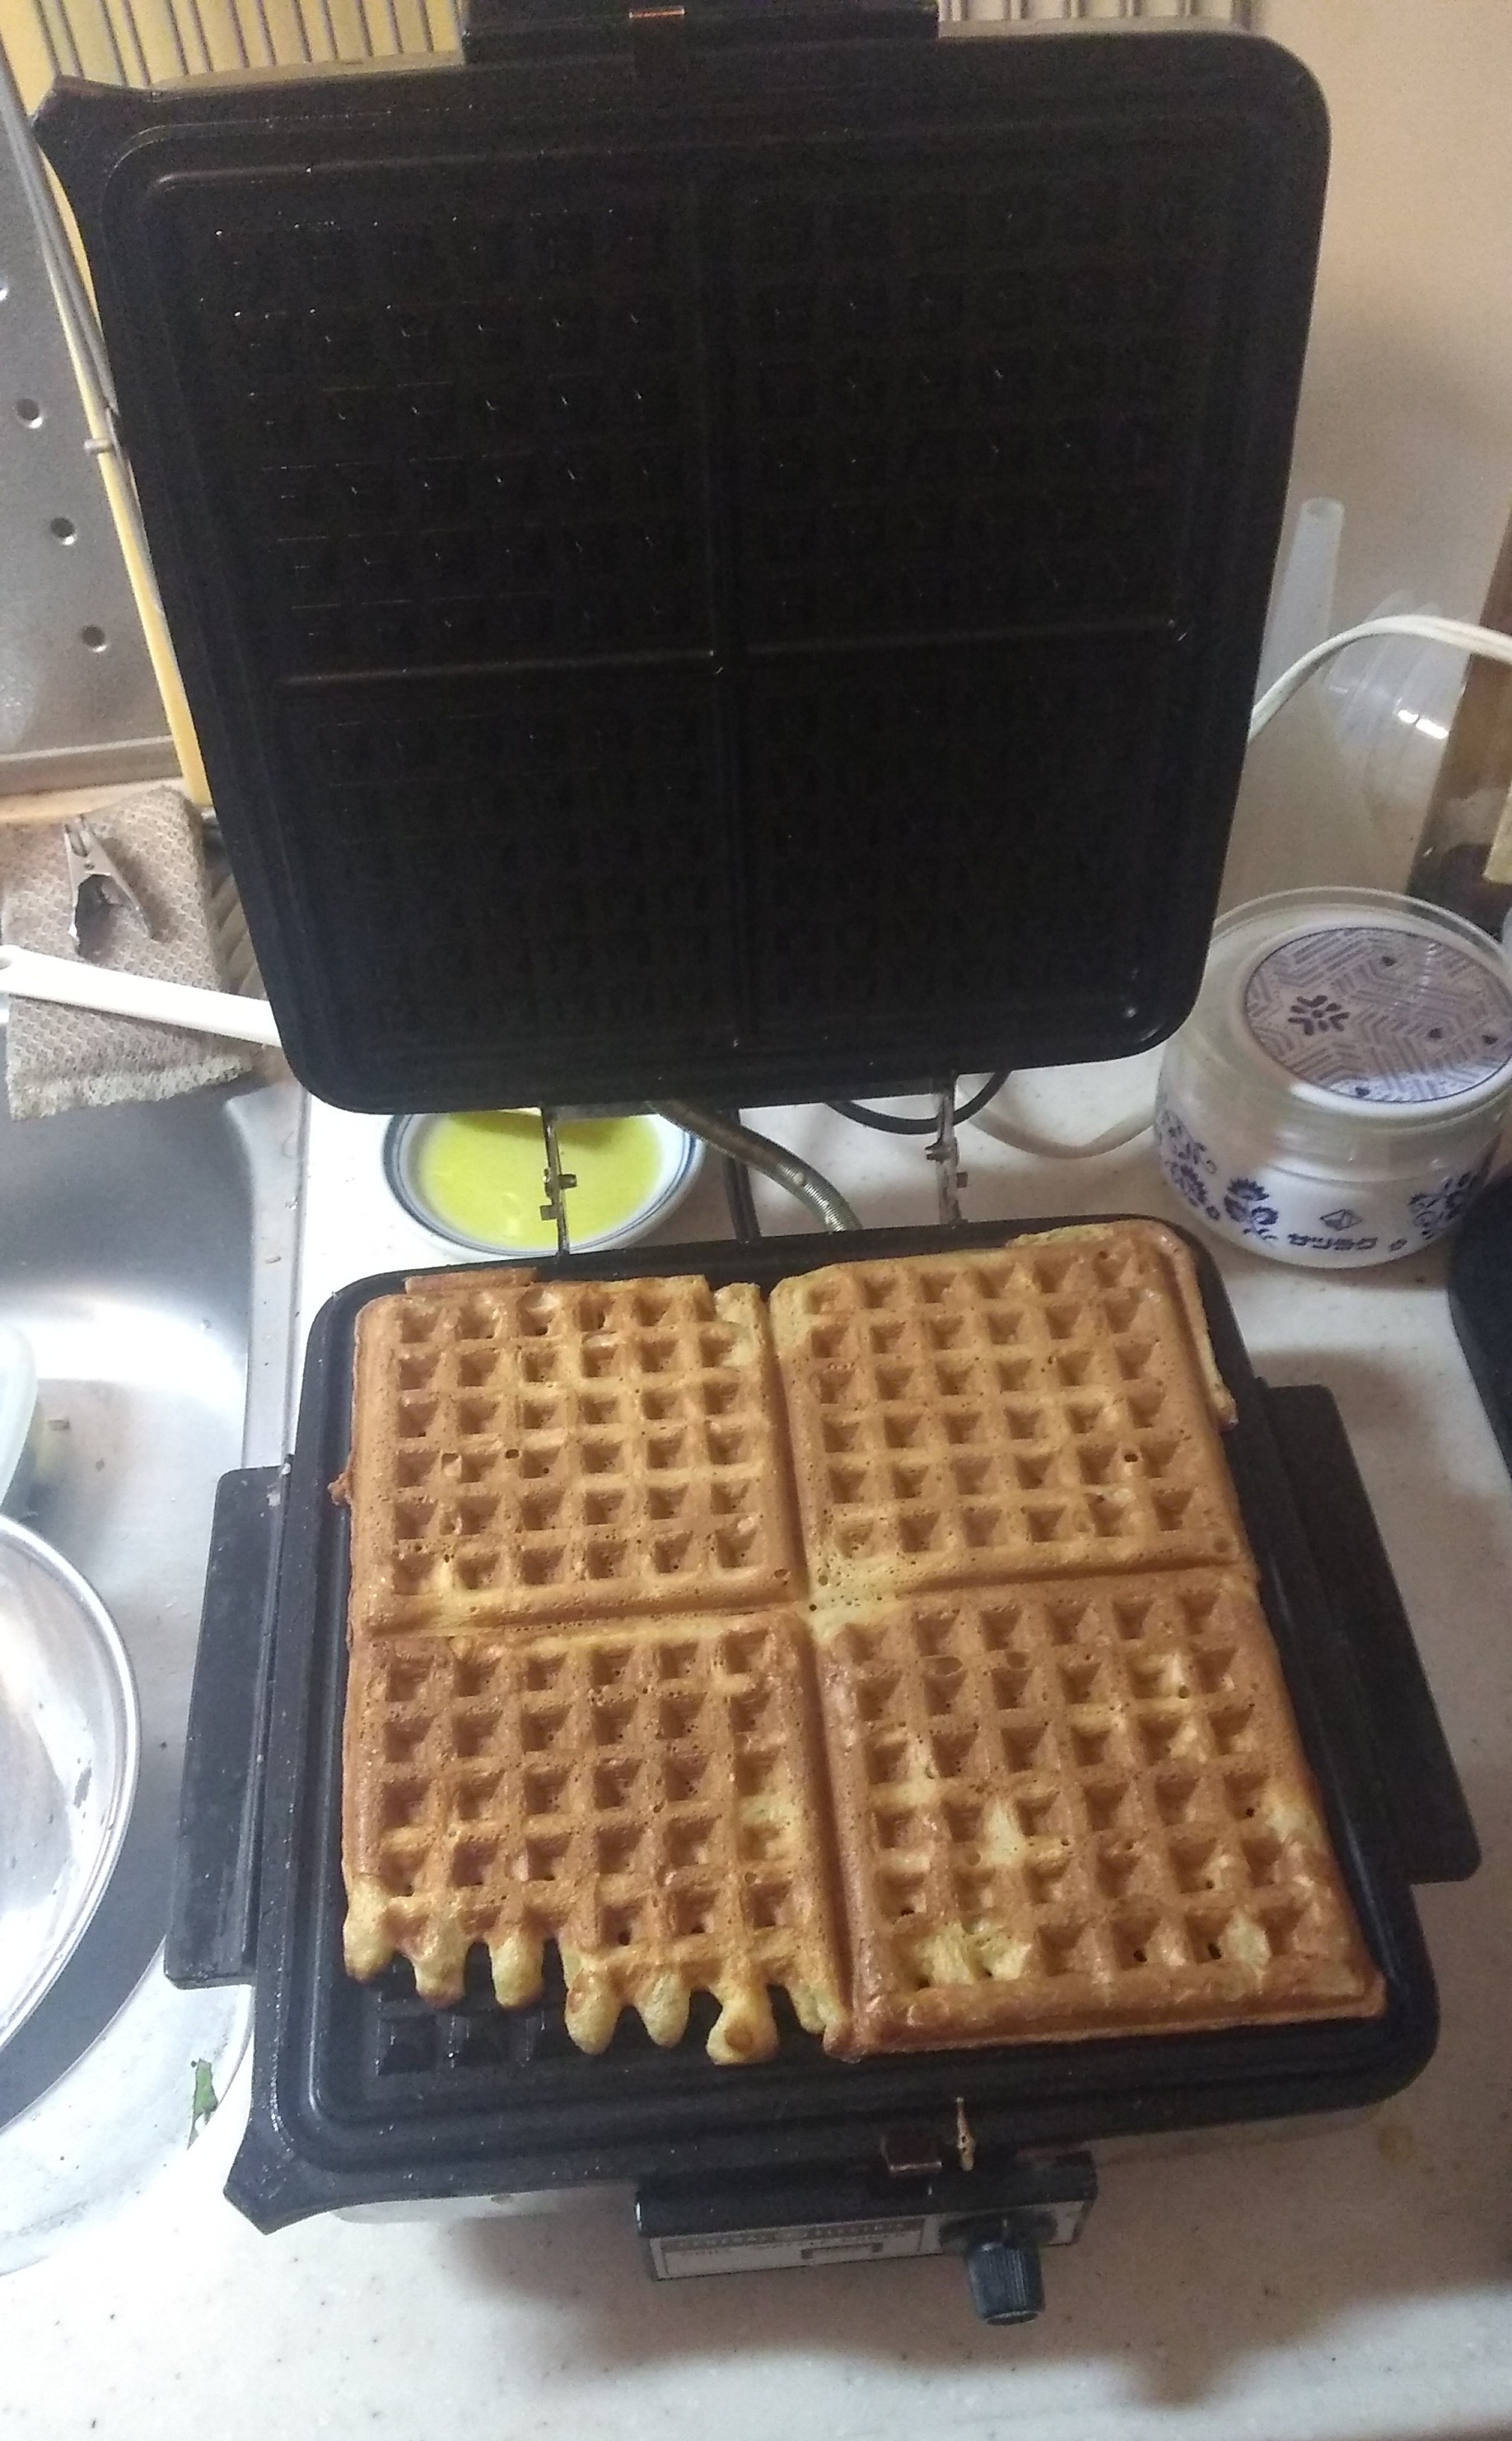 A stainless steel electric waffle iron by General Electric, open to reveal a baked waffle ready to lift out.